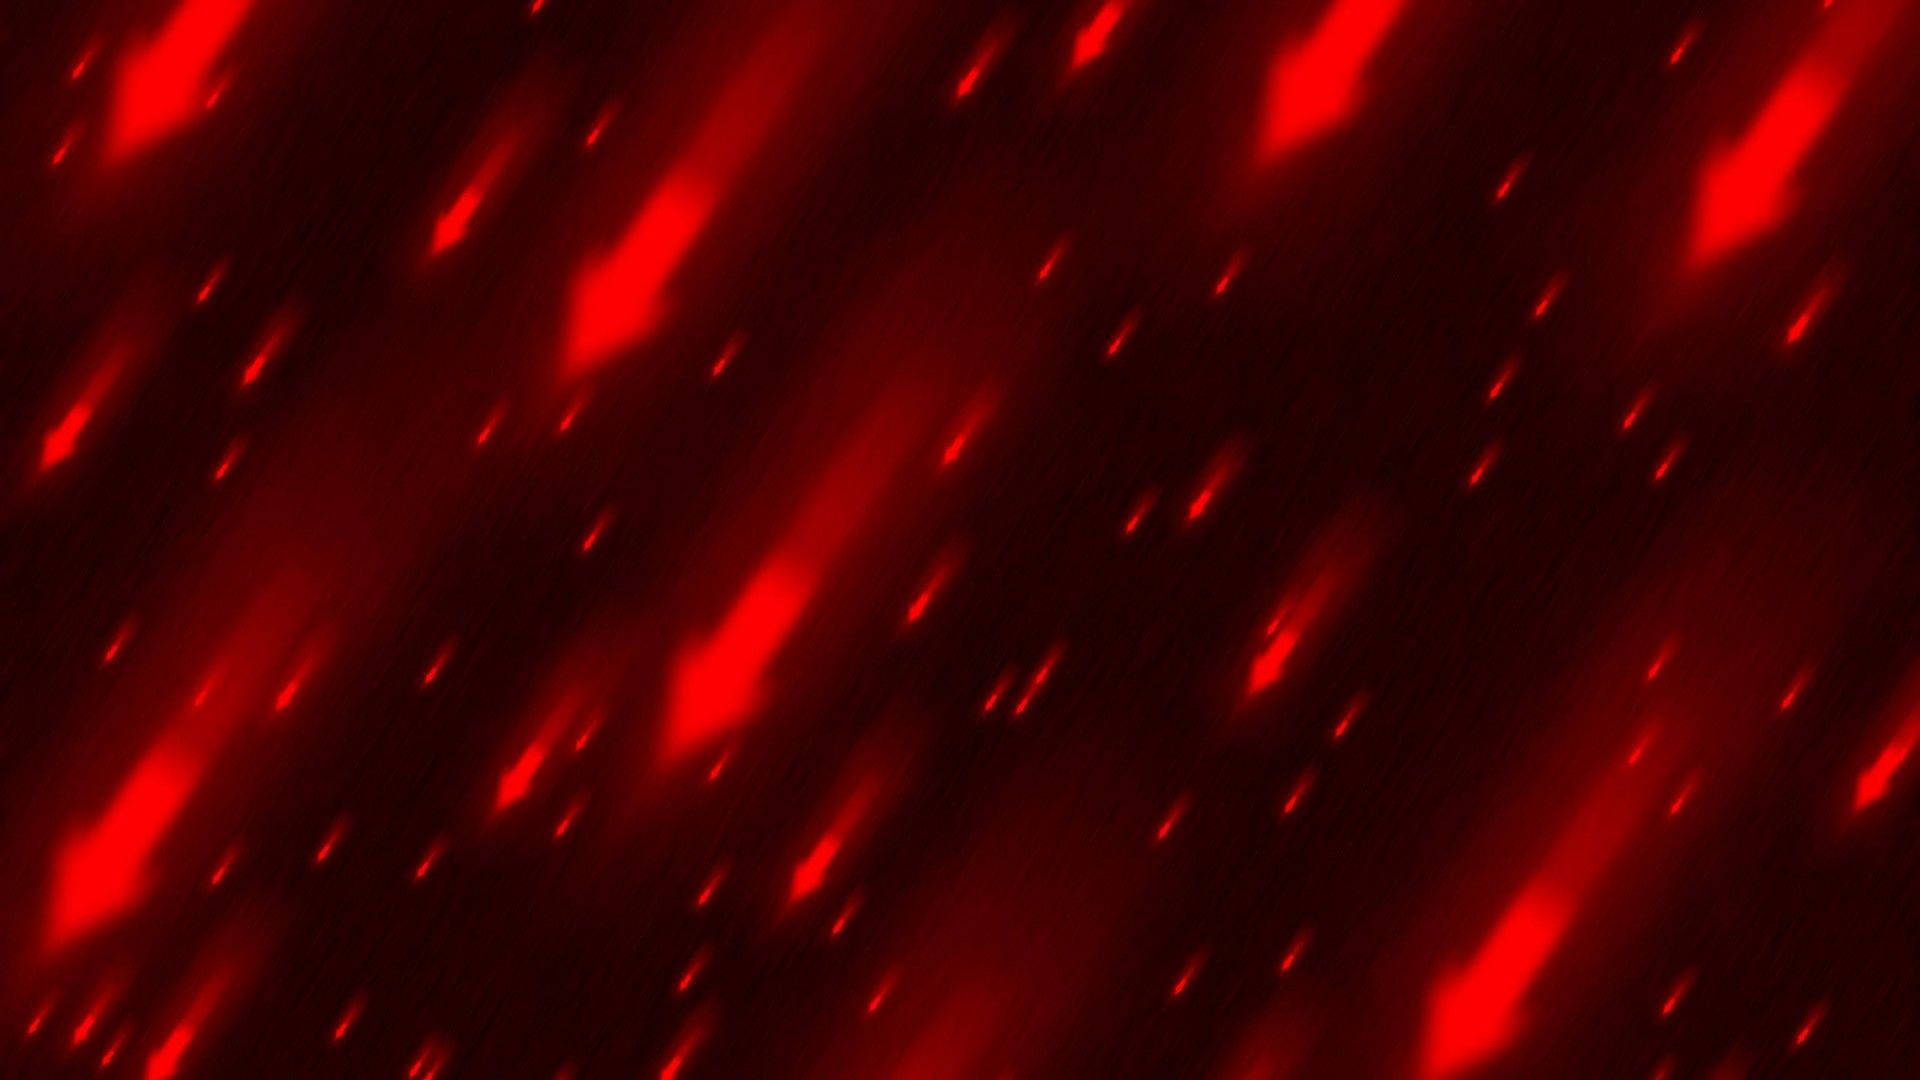 Pure Red Falling Arrows Background